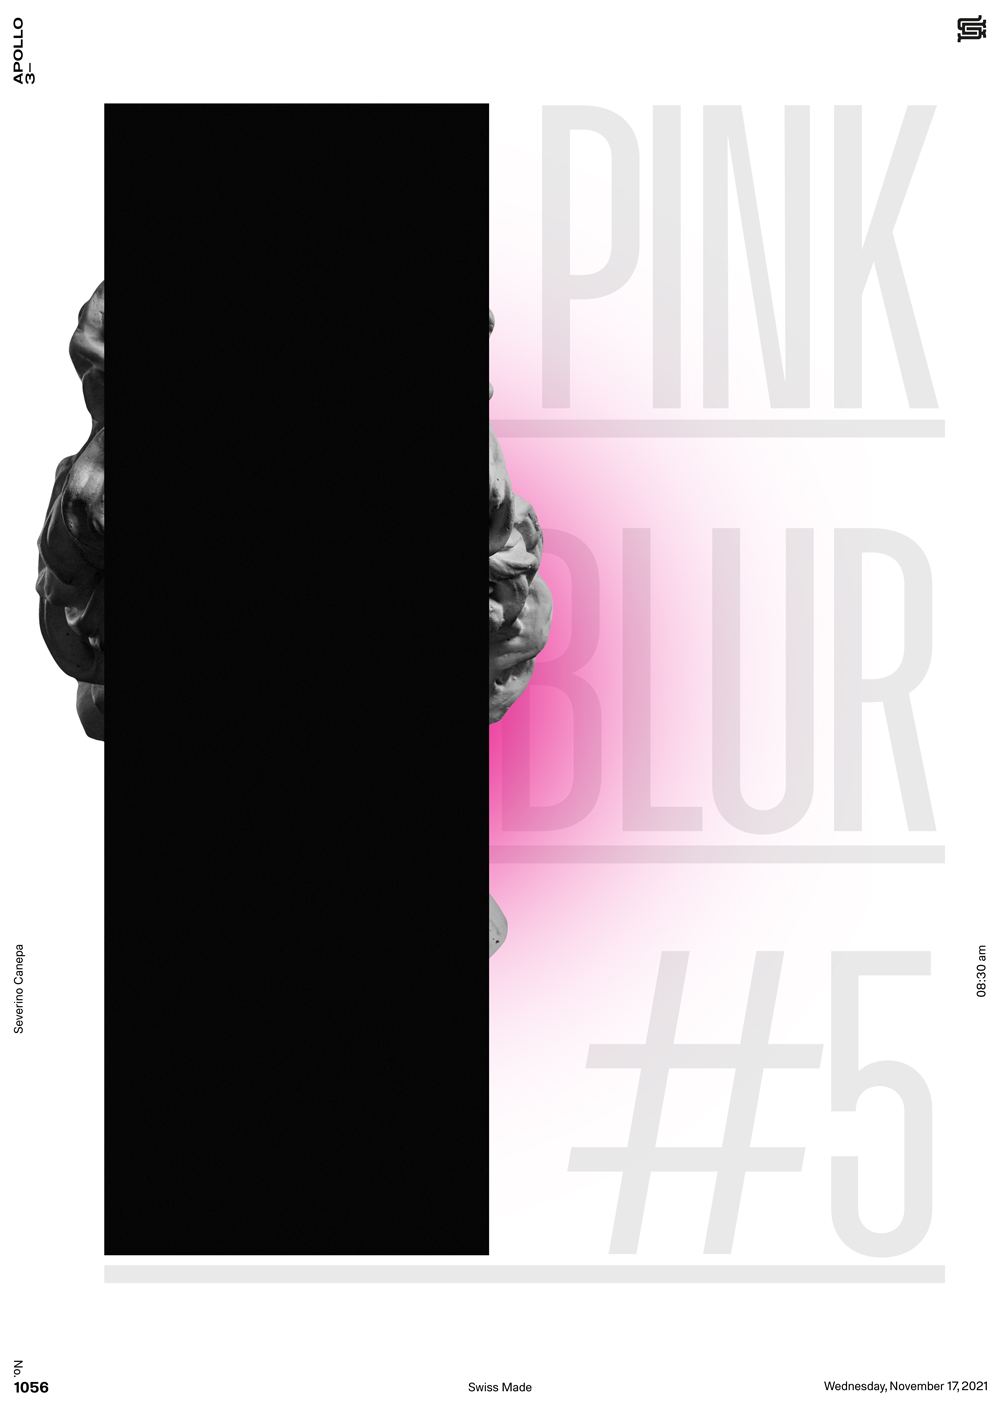 Pink Blur number 5 is a minimalist design I realized with a rectangle, typography, a gradient, and apollo